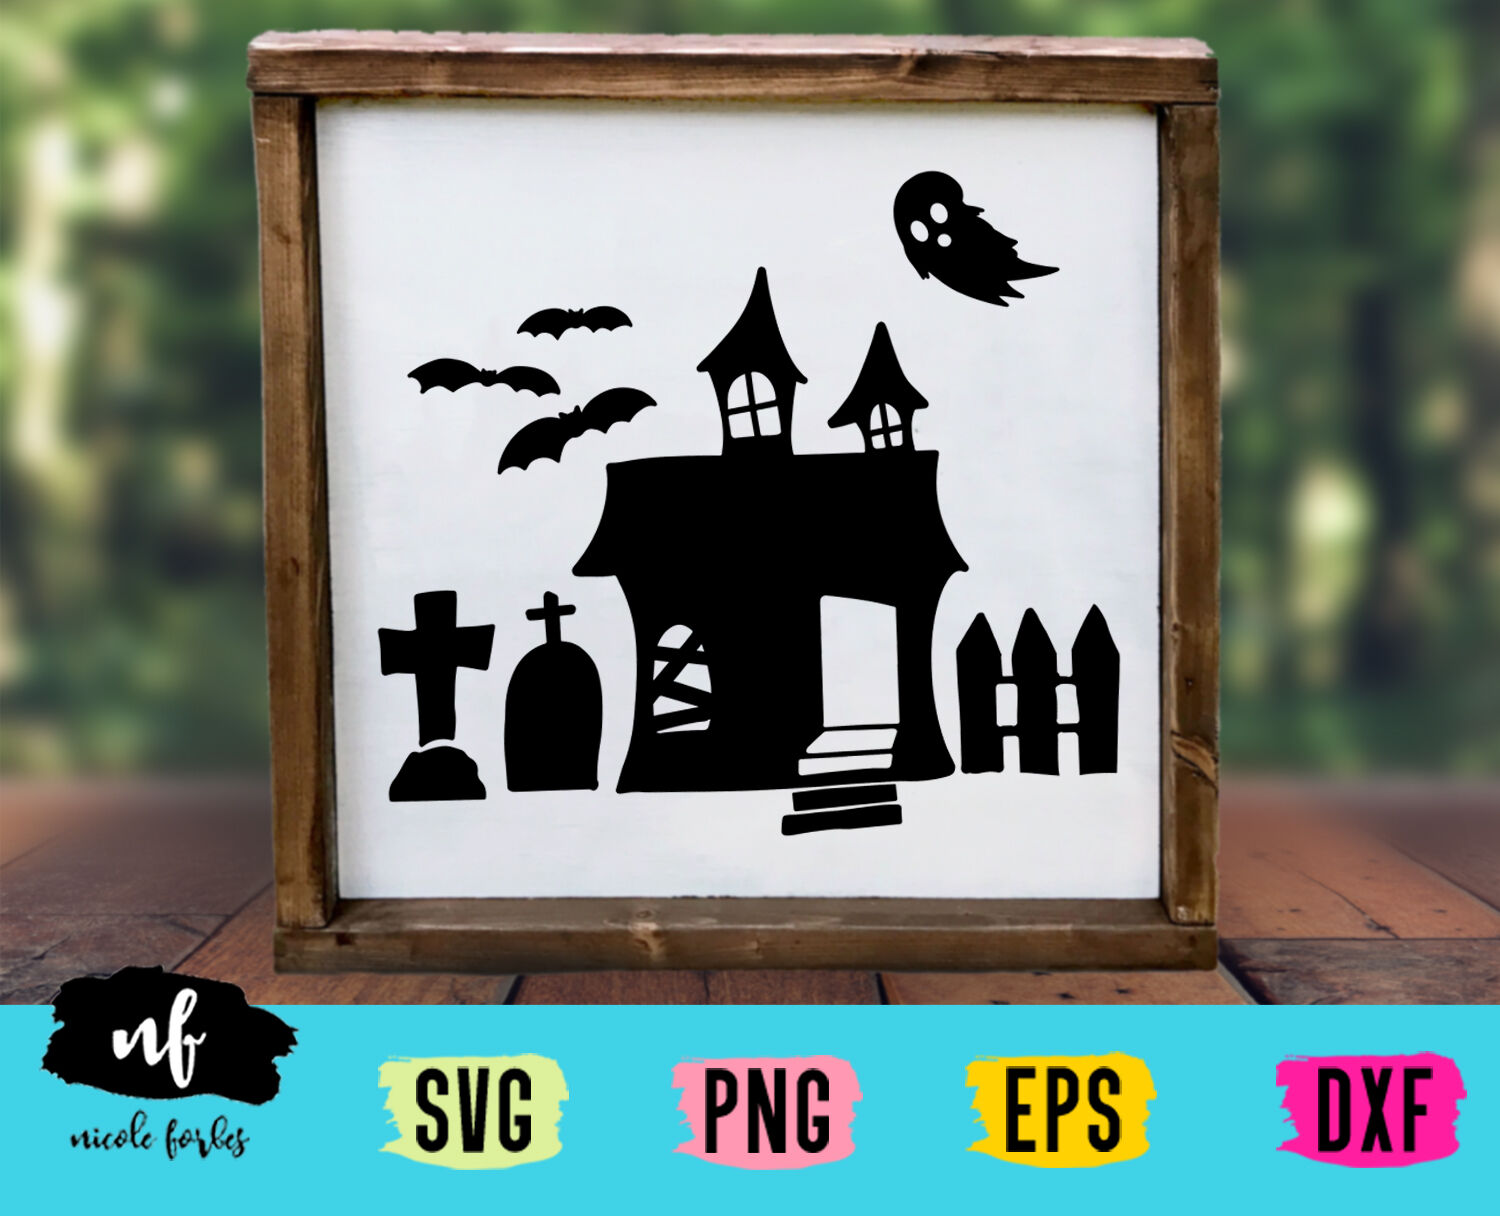 Haunted House Silhouette Svg Cut File By Nicole Forbes Designs Thehungryjpeg Com